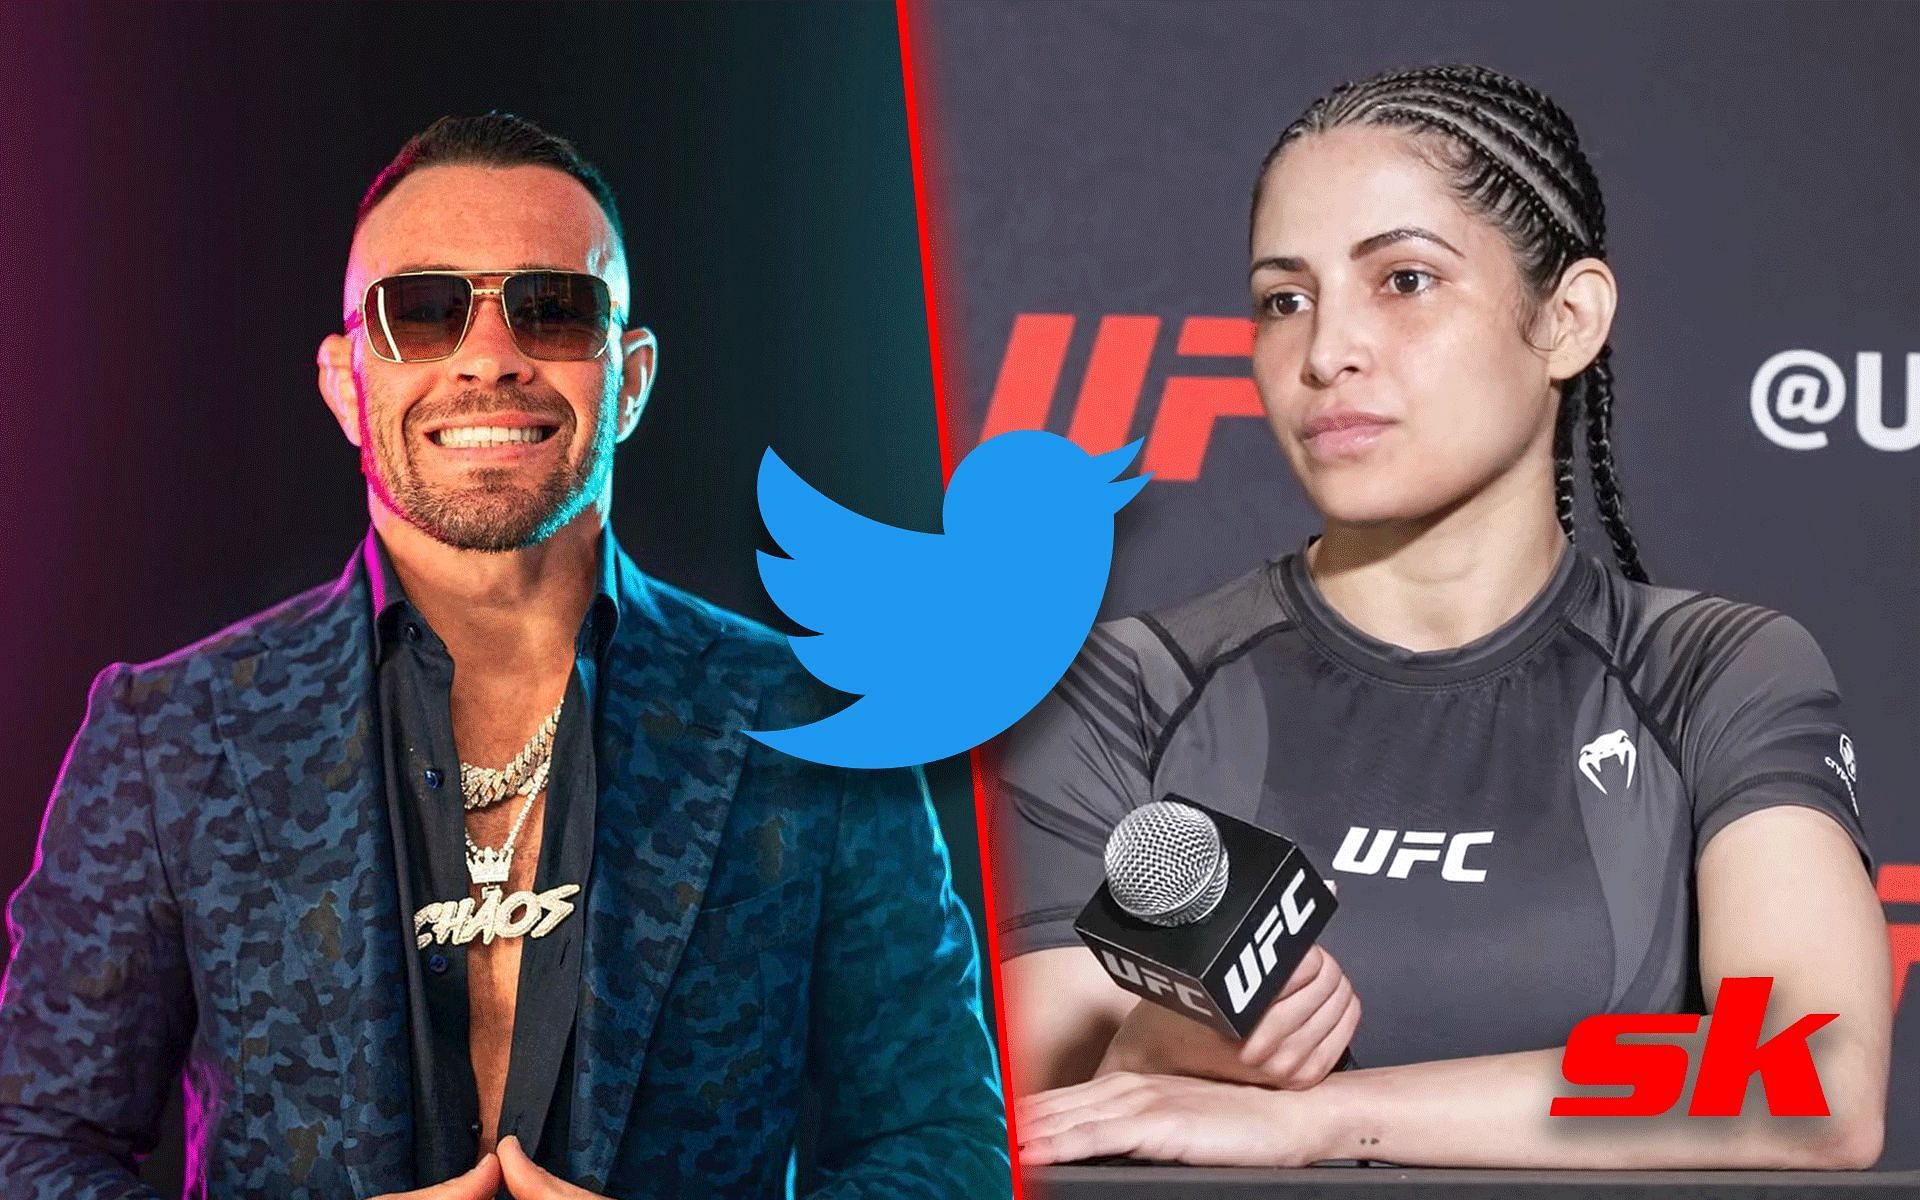 (L) Colby Covington (R) Polyana Viana (Photo credit: @colbycovington - Instagram, Twitter {about.twitter.com}, and MMA Junkie - YouTube)